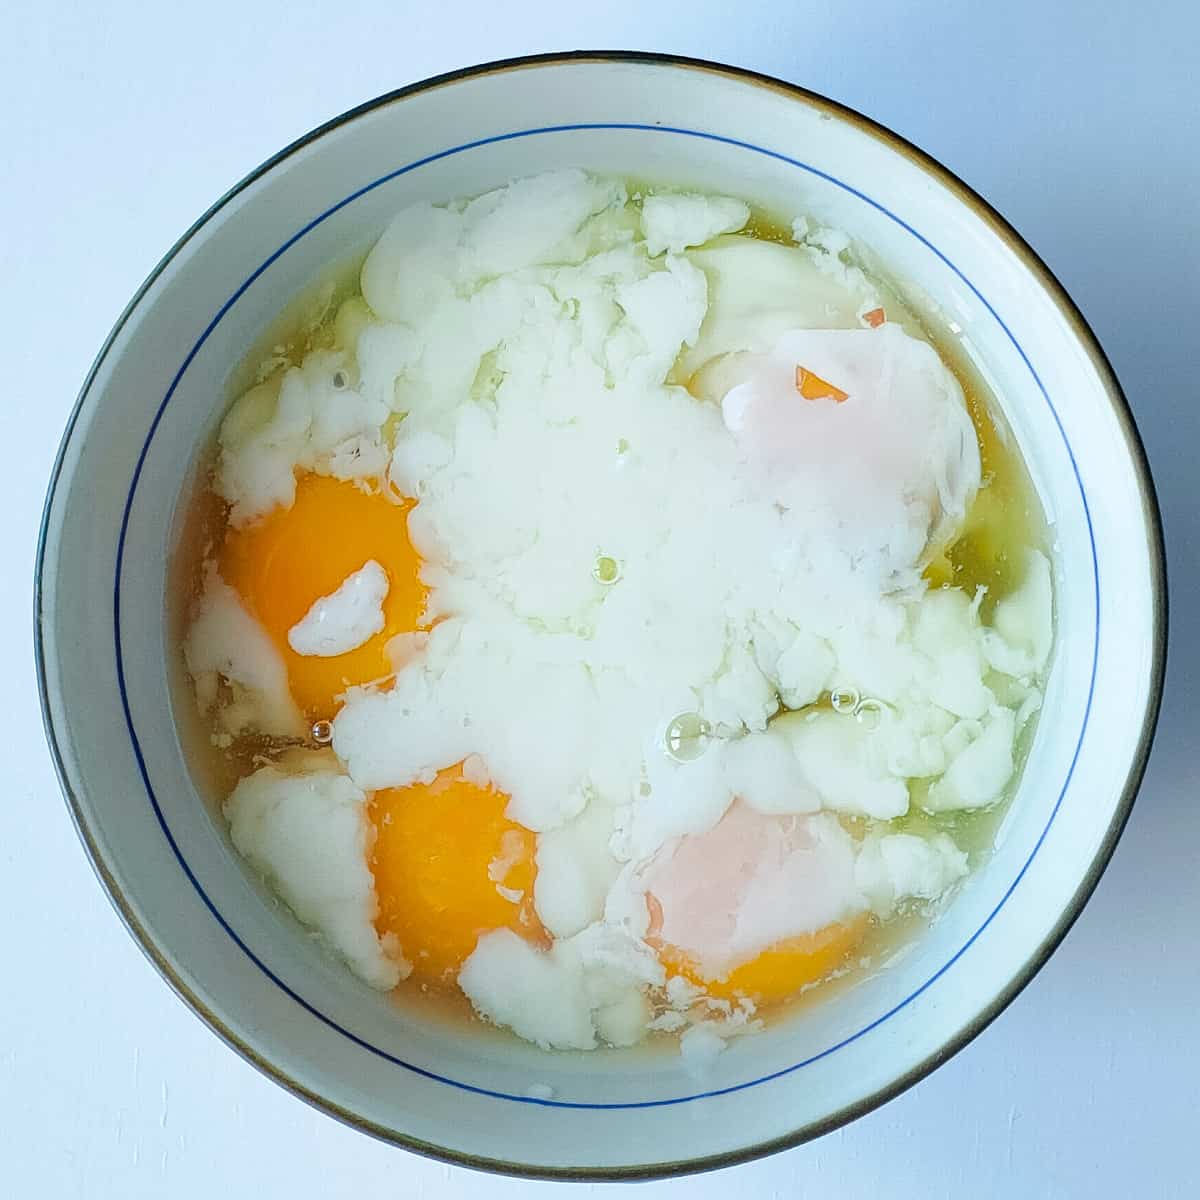 Half-boiled eggs in a white bowl.